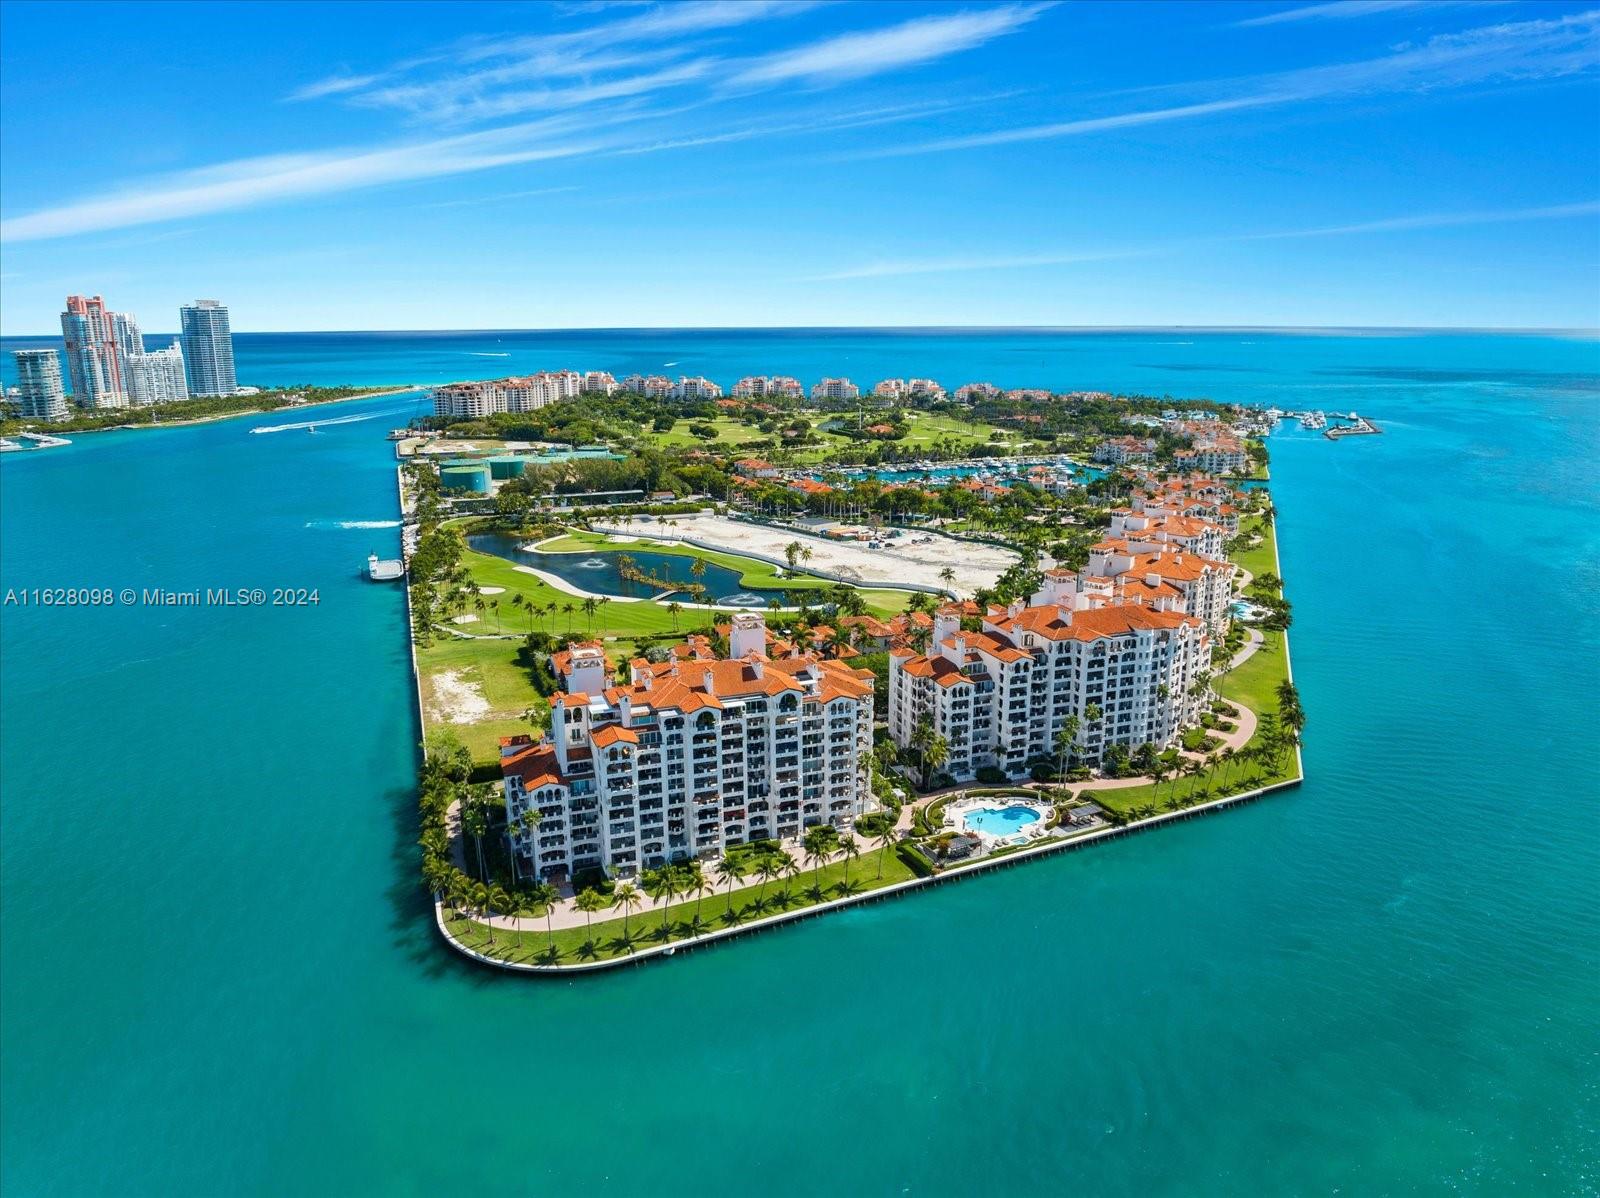 EXPERIENCE FISHER ISLAND LIVING AT IT'S FINEST IN THIS STUNNING BAYVIEW RENTAL OVERLOOKING THE MIAMI DOWNTOWN SKYLINE & BISCAYNE BAY. THIS MAGNIFICENT UNIT HAS BEEN BEAUTIFULLY RENOVATED AND DECORATED. IT SHOWCASES: 4 BEDROOMS, 4.5 BATHS, FORMAL DINING ROOM, KITCHEN WITH TOP-OF-THE-LINE APPLIANCES, EXPANSIVE TERRACES PERFECT FOR ENTERTAINING, MARBLE FLOORS THROUGHOUT, IMPACT GLASS DOORS AND MANY MORE FEATURES. THIS EXCEPTIONAL OFFERING IS OFFERED FULLY FURNISHED. AVAILABLE STARTING AUGUST 15TH.  VISIT THIS EXCEPTIONAL OFFERING!